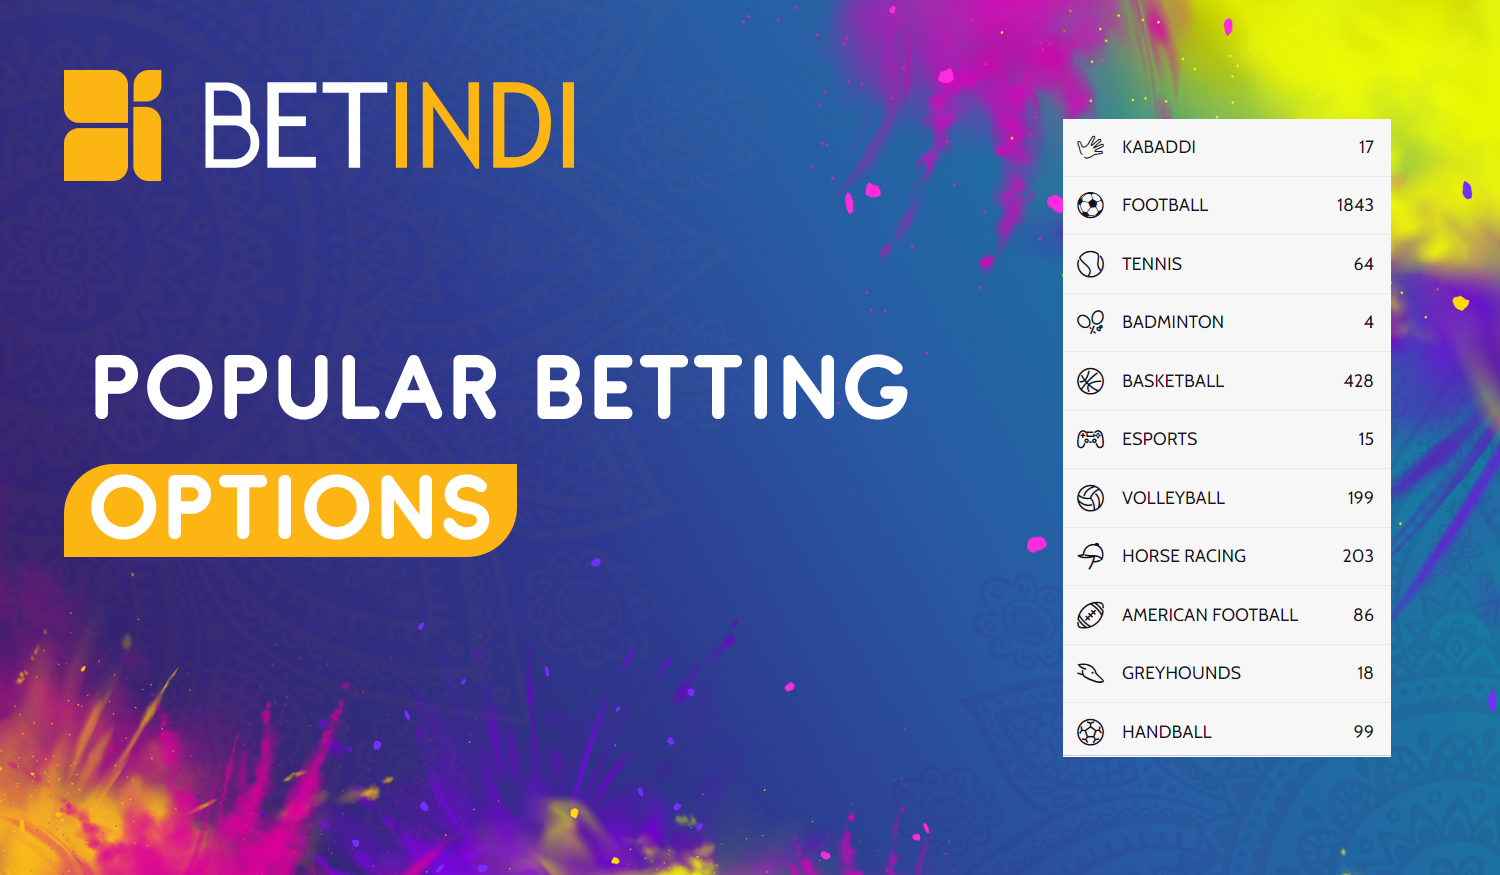 What Betting Options are popular among Indian Betindi users